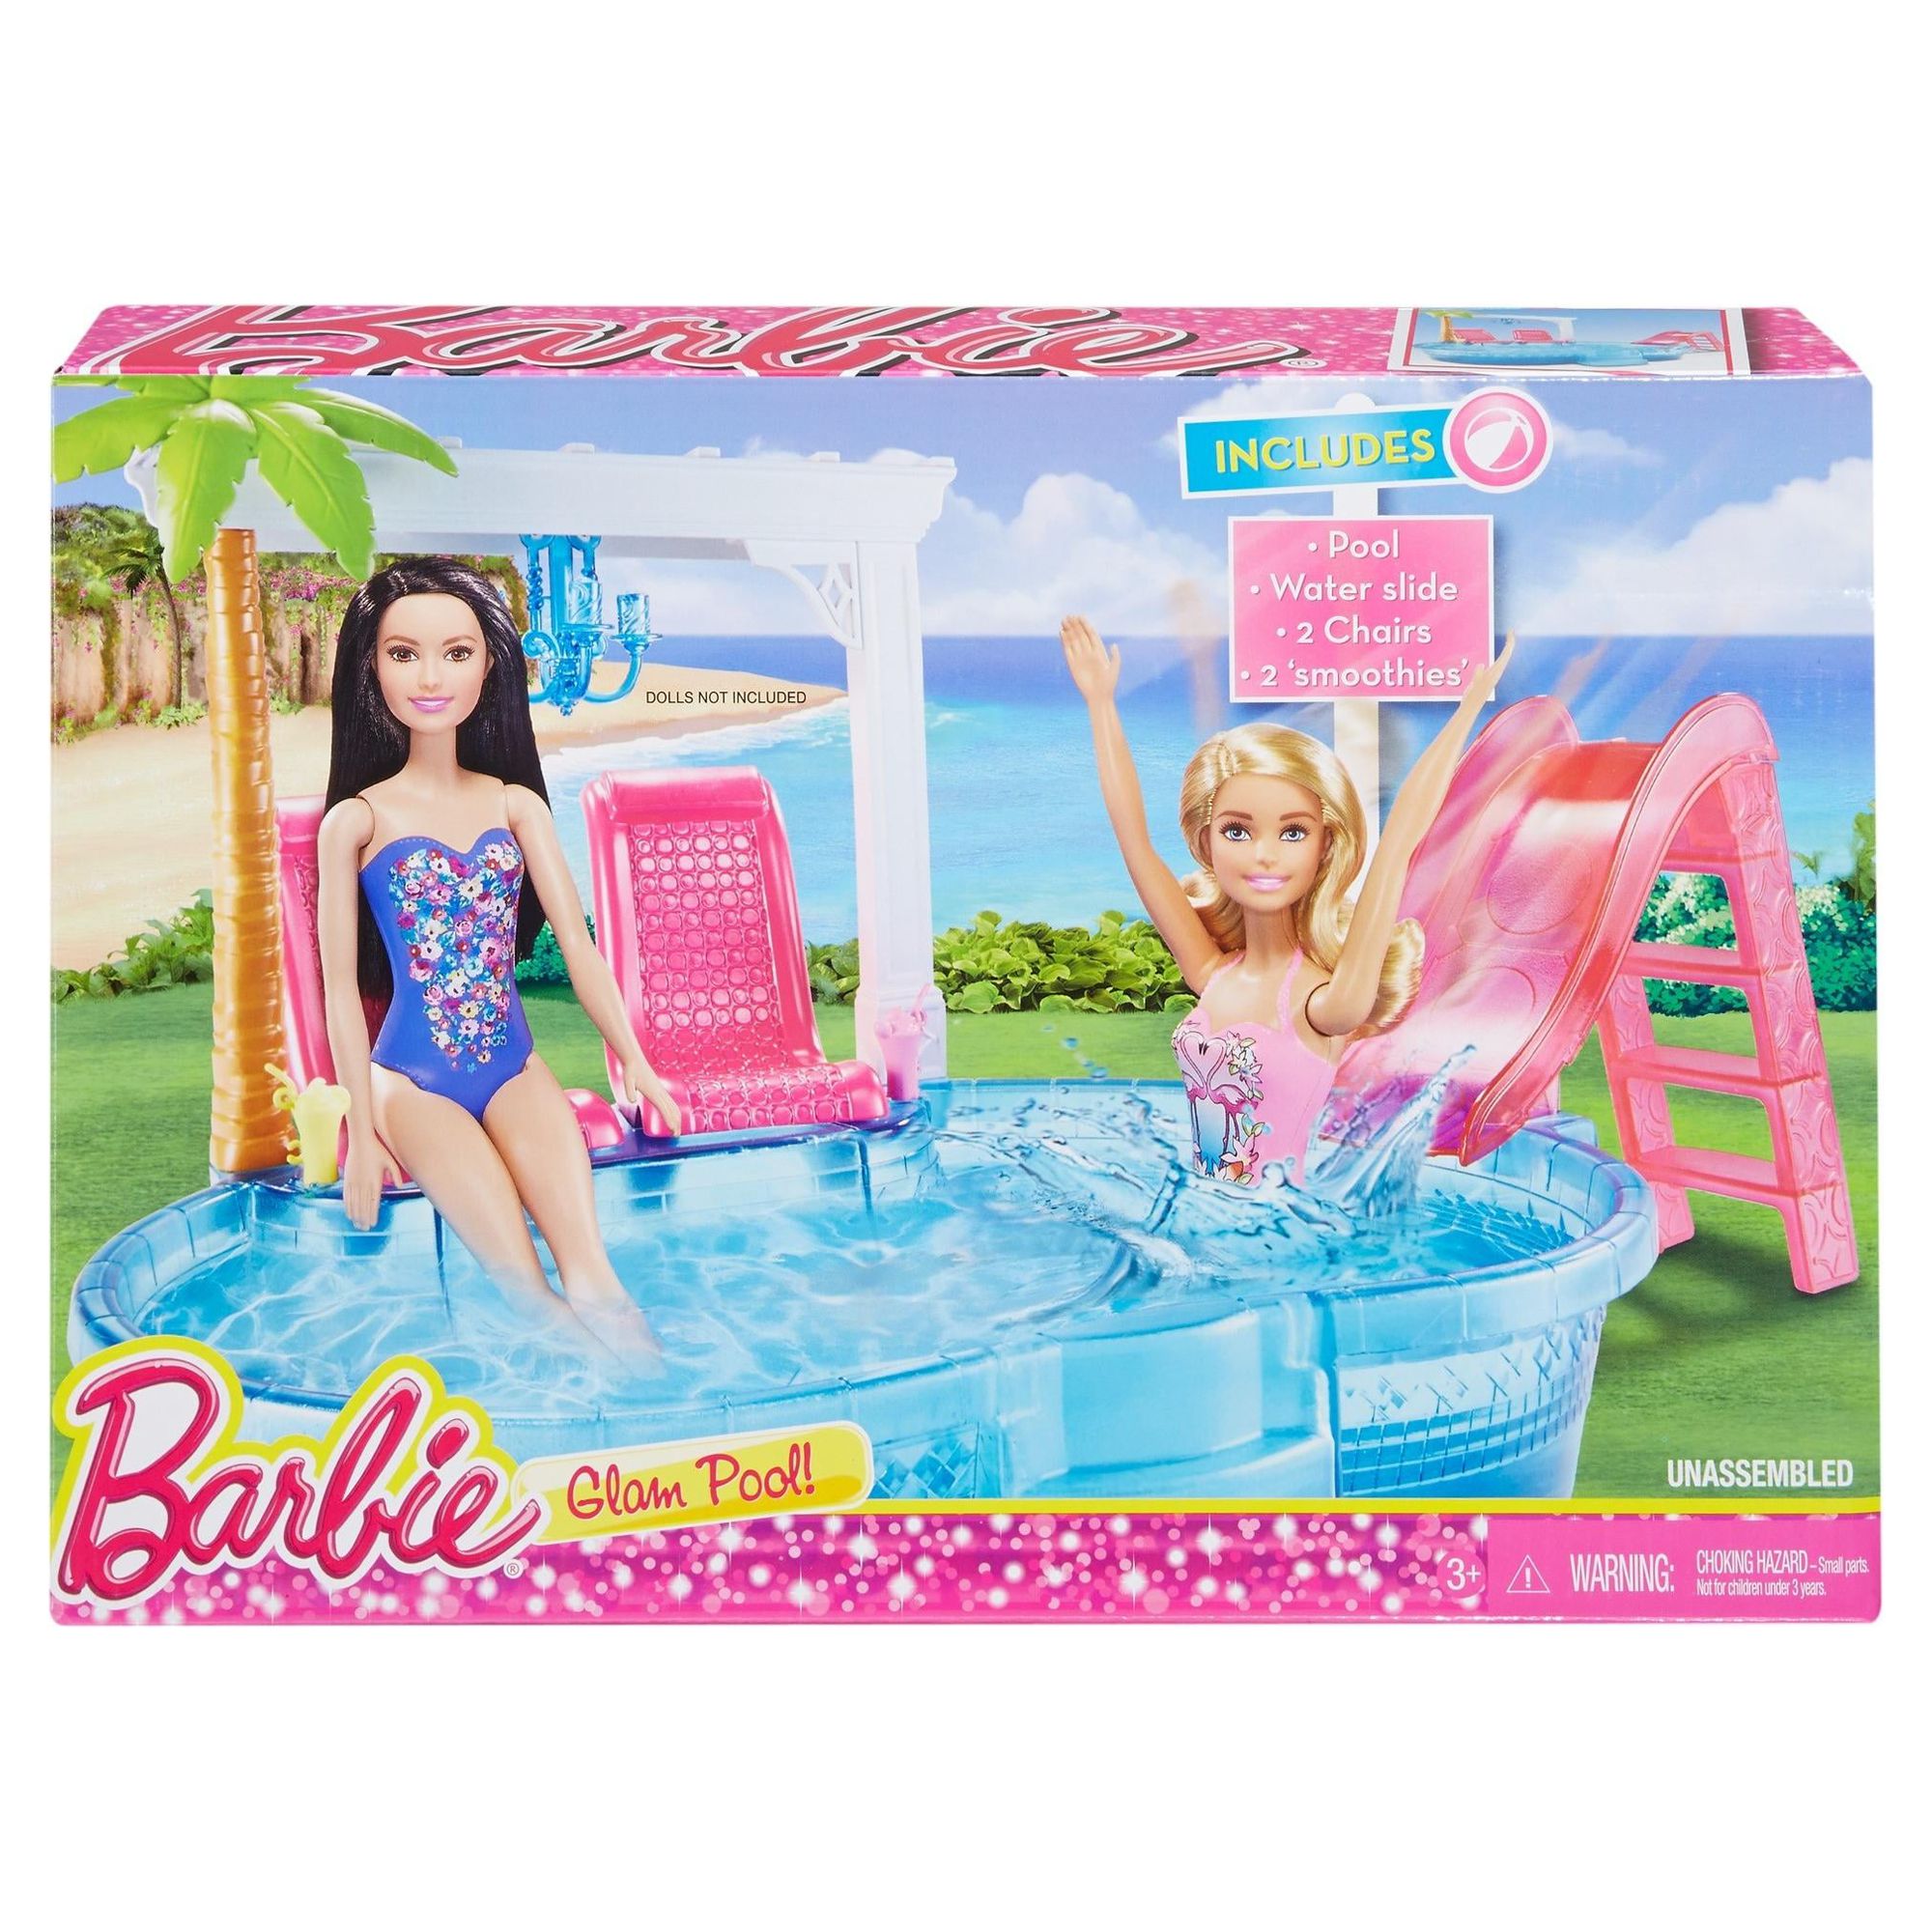 Barbie Glam Pool Party Playset with Themed-Accessories - image 4 of 5